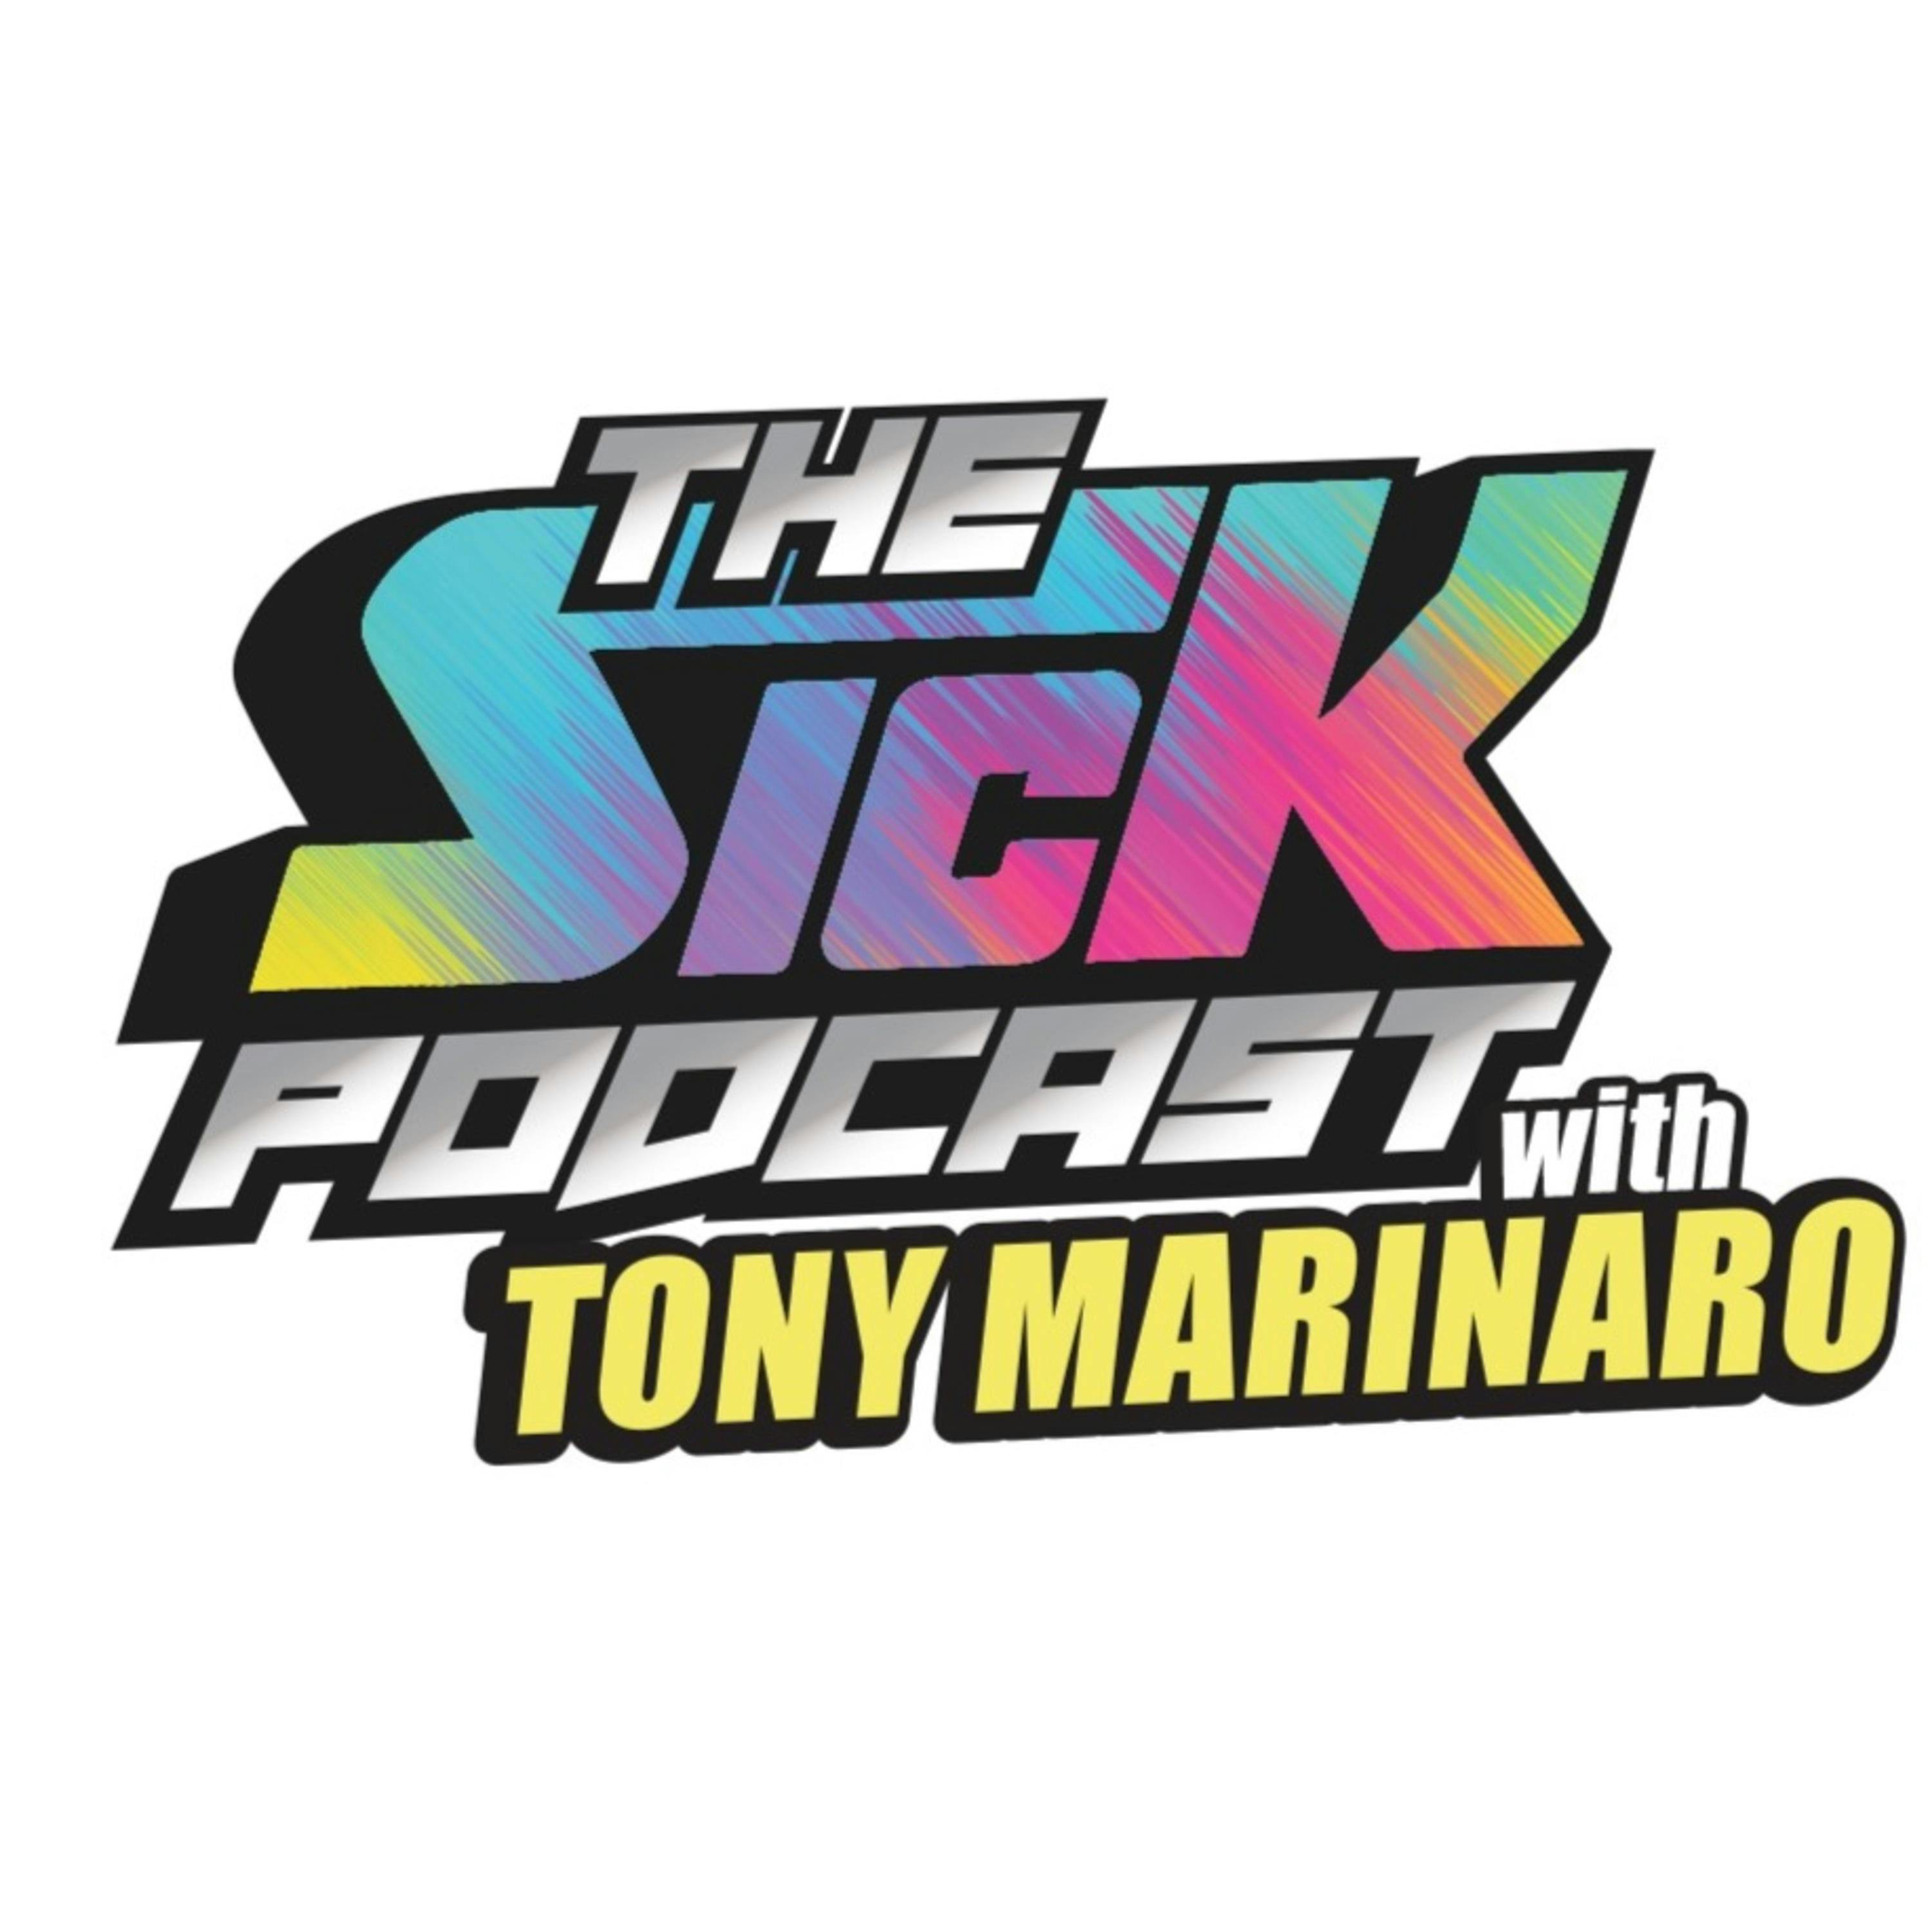 Kirby Dach Looked Dominant At Times | The Sick Podcast with Tony Marinaro March 21 2023